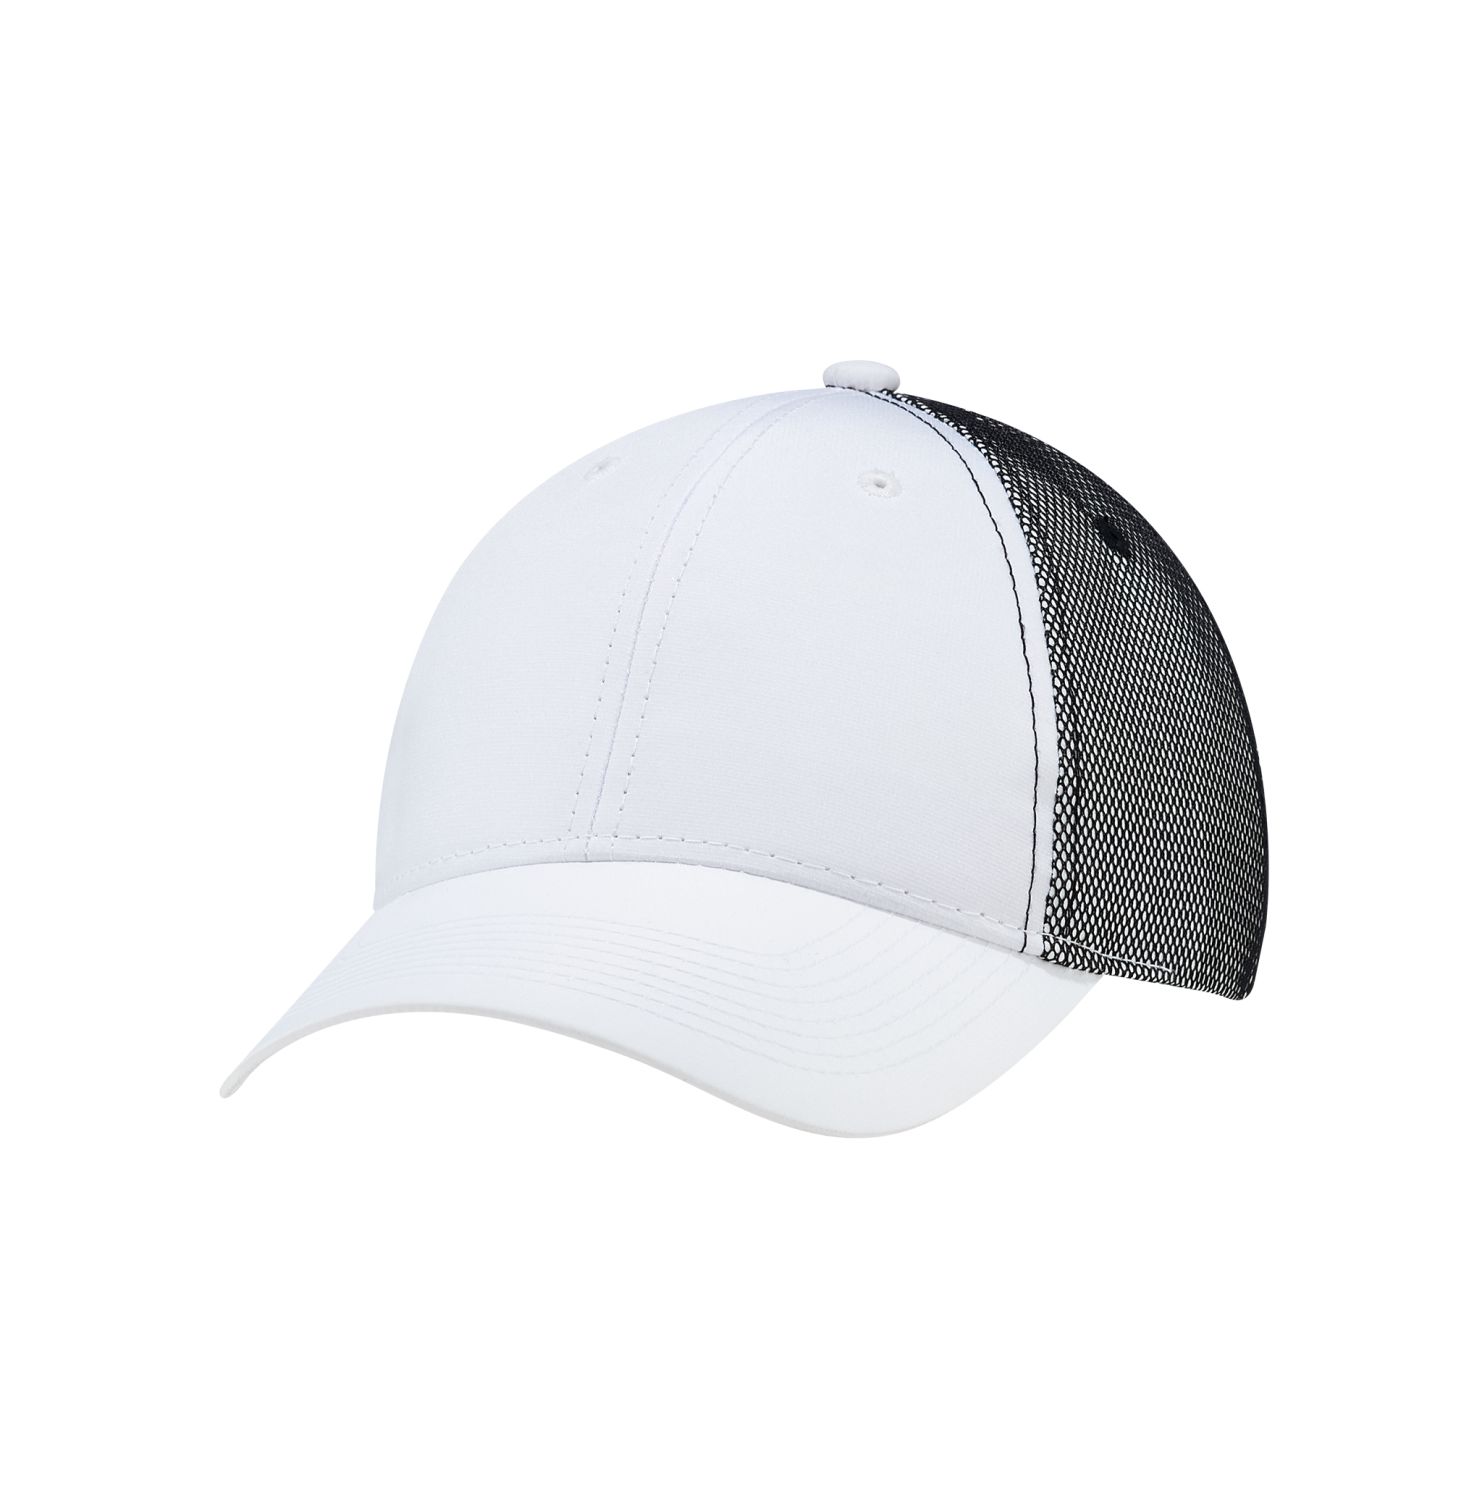 AJM Polyester Rip Stop / Polyester Rip Stop Bonded Mesh 6 Panel Constructed Full-Fit Hat #1B637M White / Black